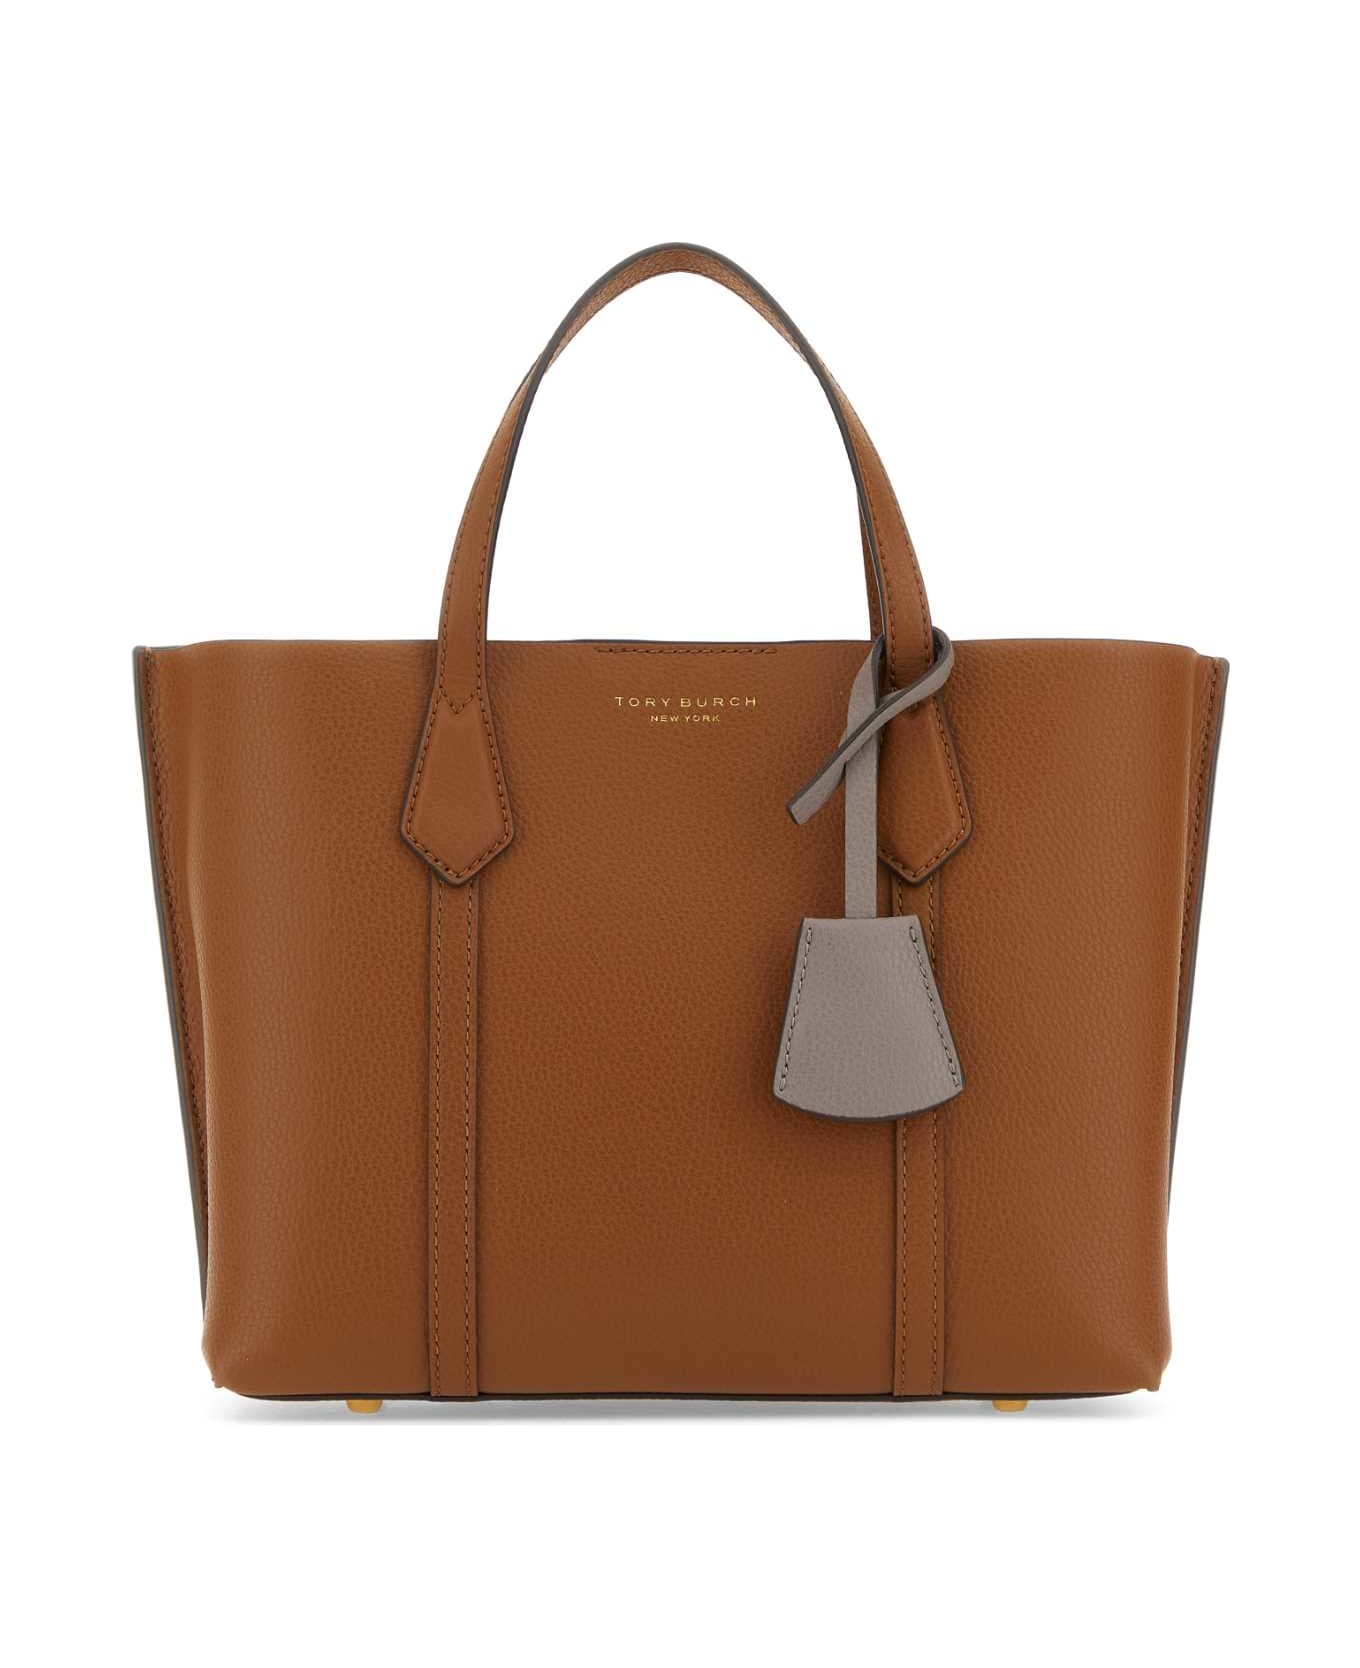 Tory Burch Brown Leather Perry Shopping Bag - 905